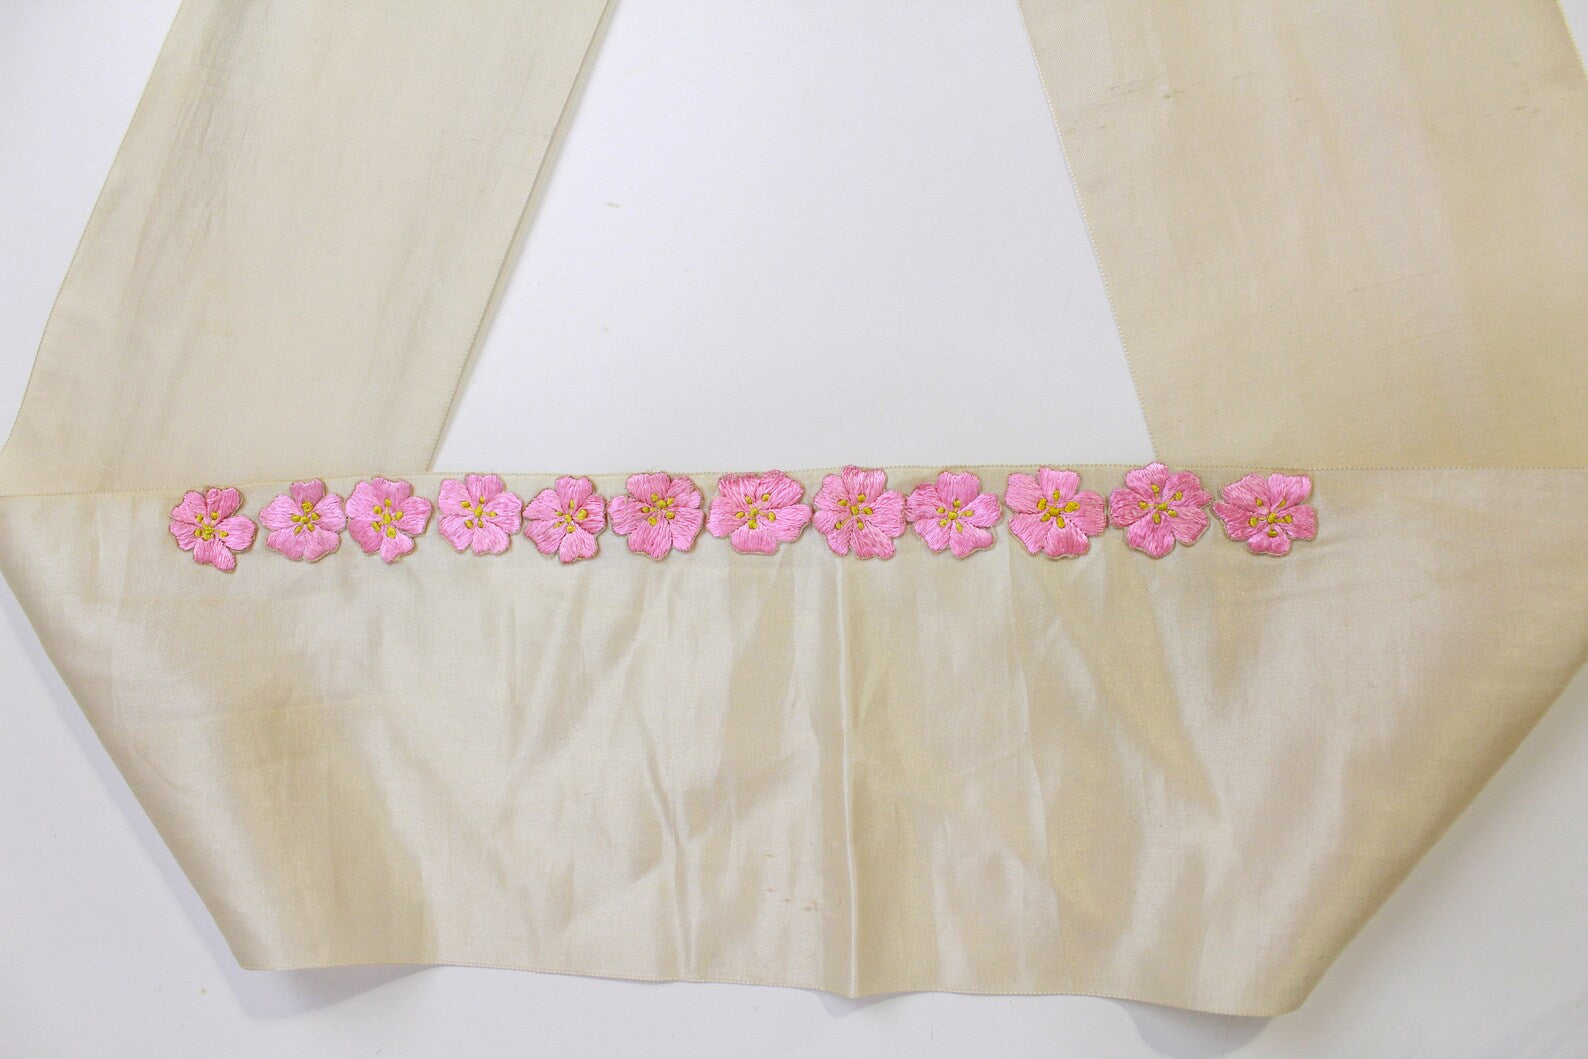 Antique Silk Sash Belt/Scarf with Appliquéd Embroidered Pink Flowers Cherry Blossoms, Pleated Ruffle Ends, 1890s/Early 1900s